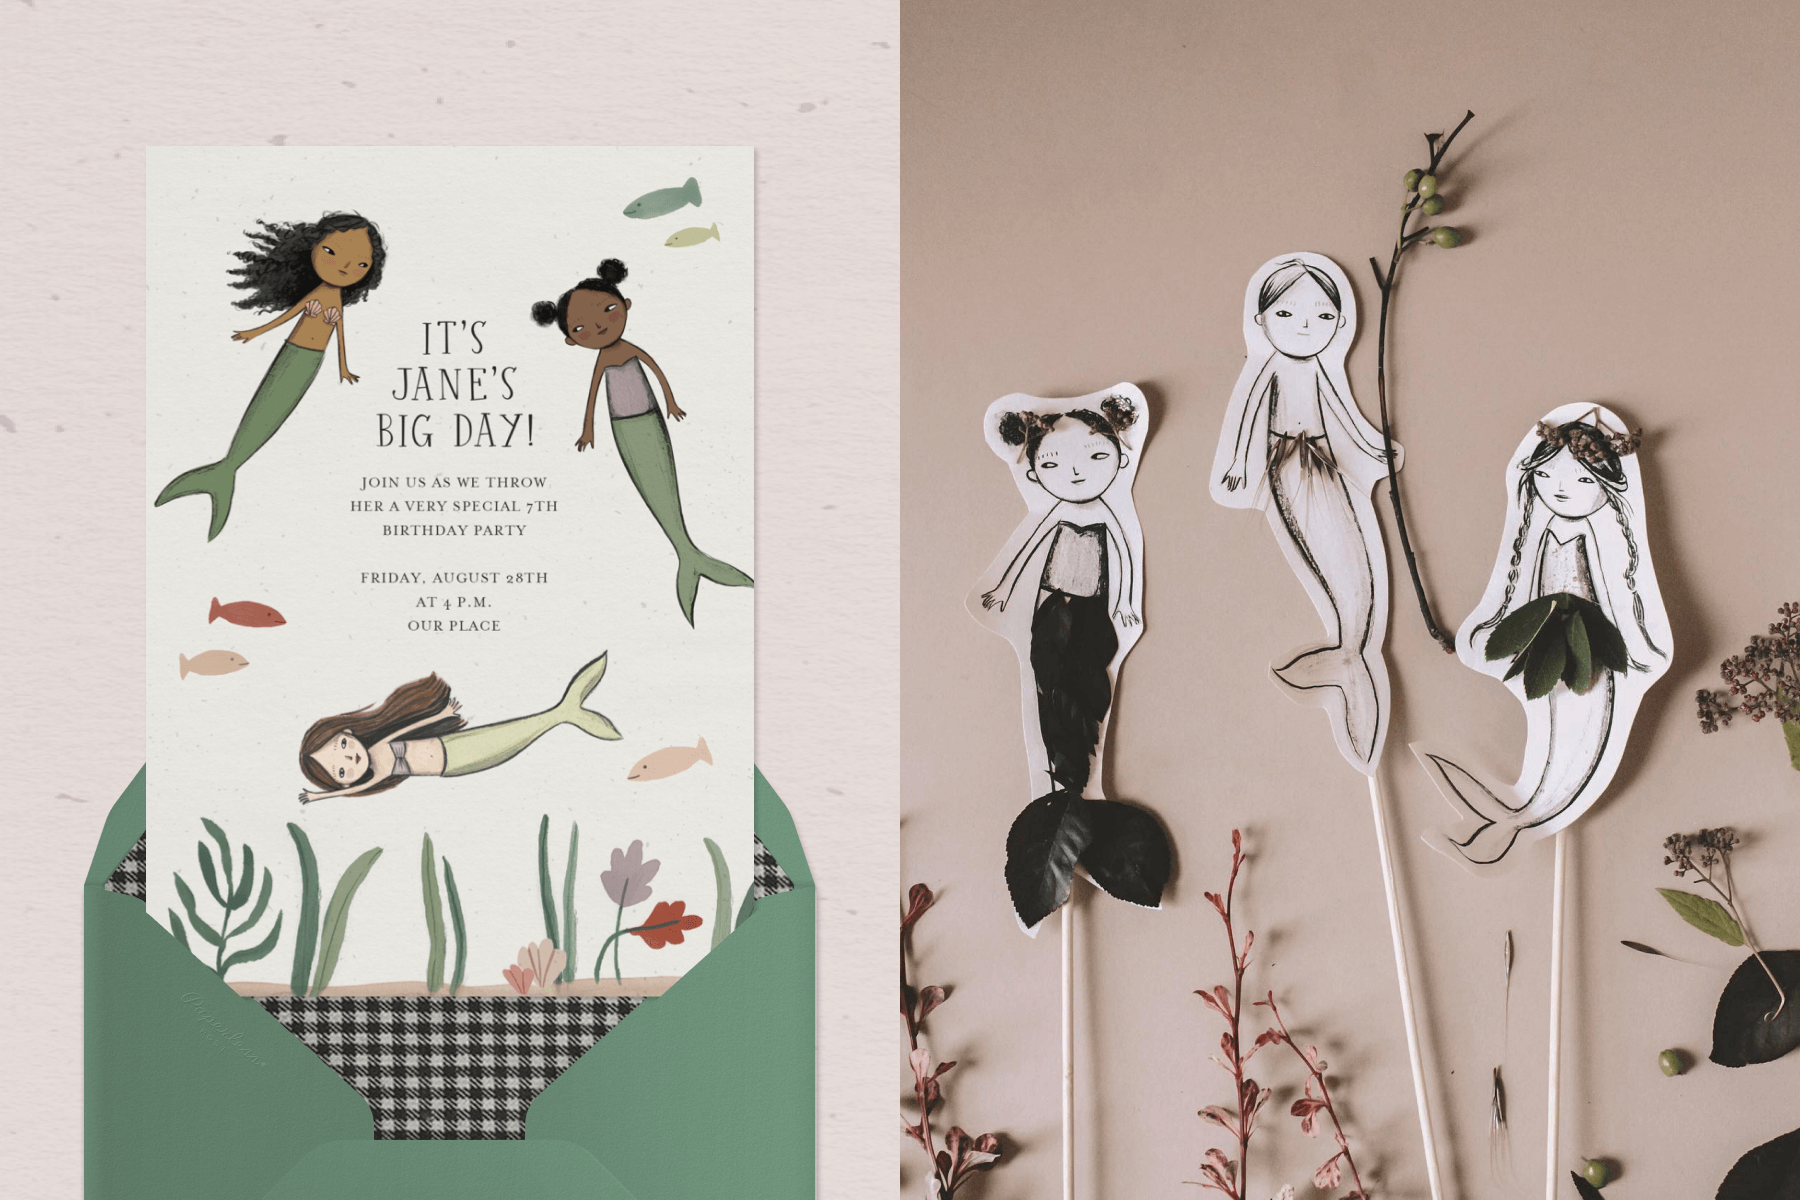 Left: Children's birthday invitation featuring three illustrated mermaids in an undersea scene on an off-white background with a green envelope. Right: Illustrated paper cutout mermaid dolls.